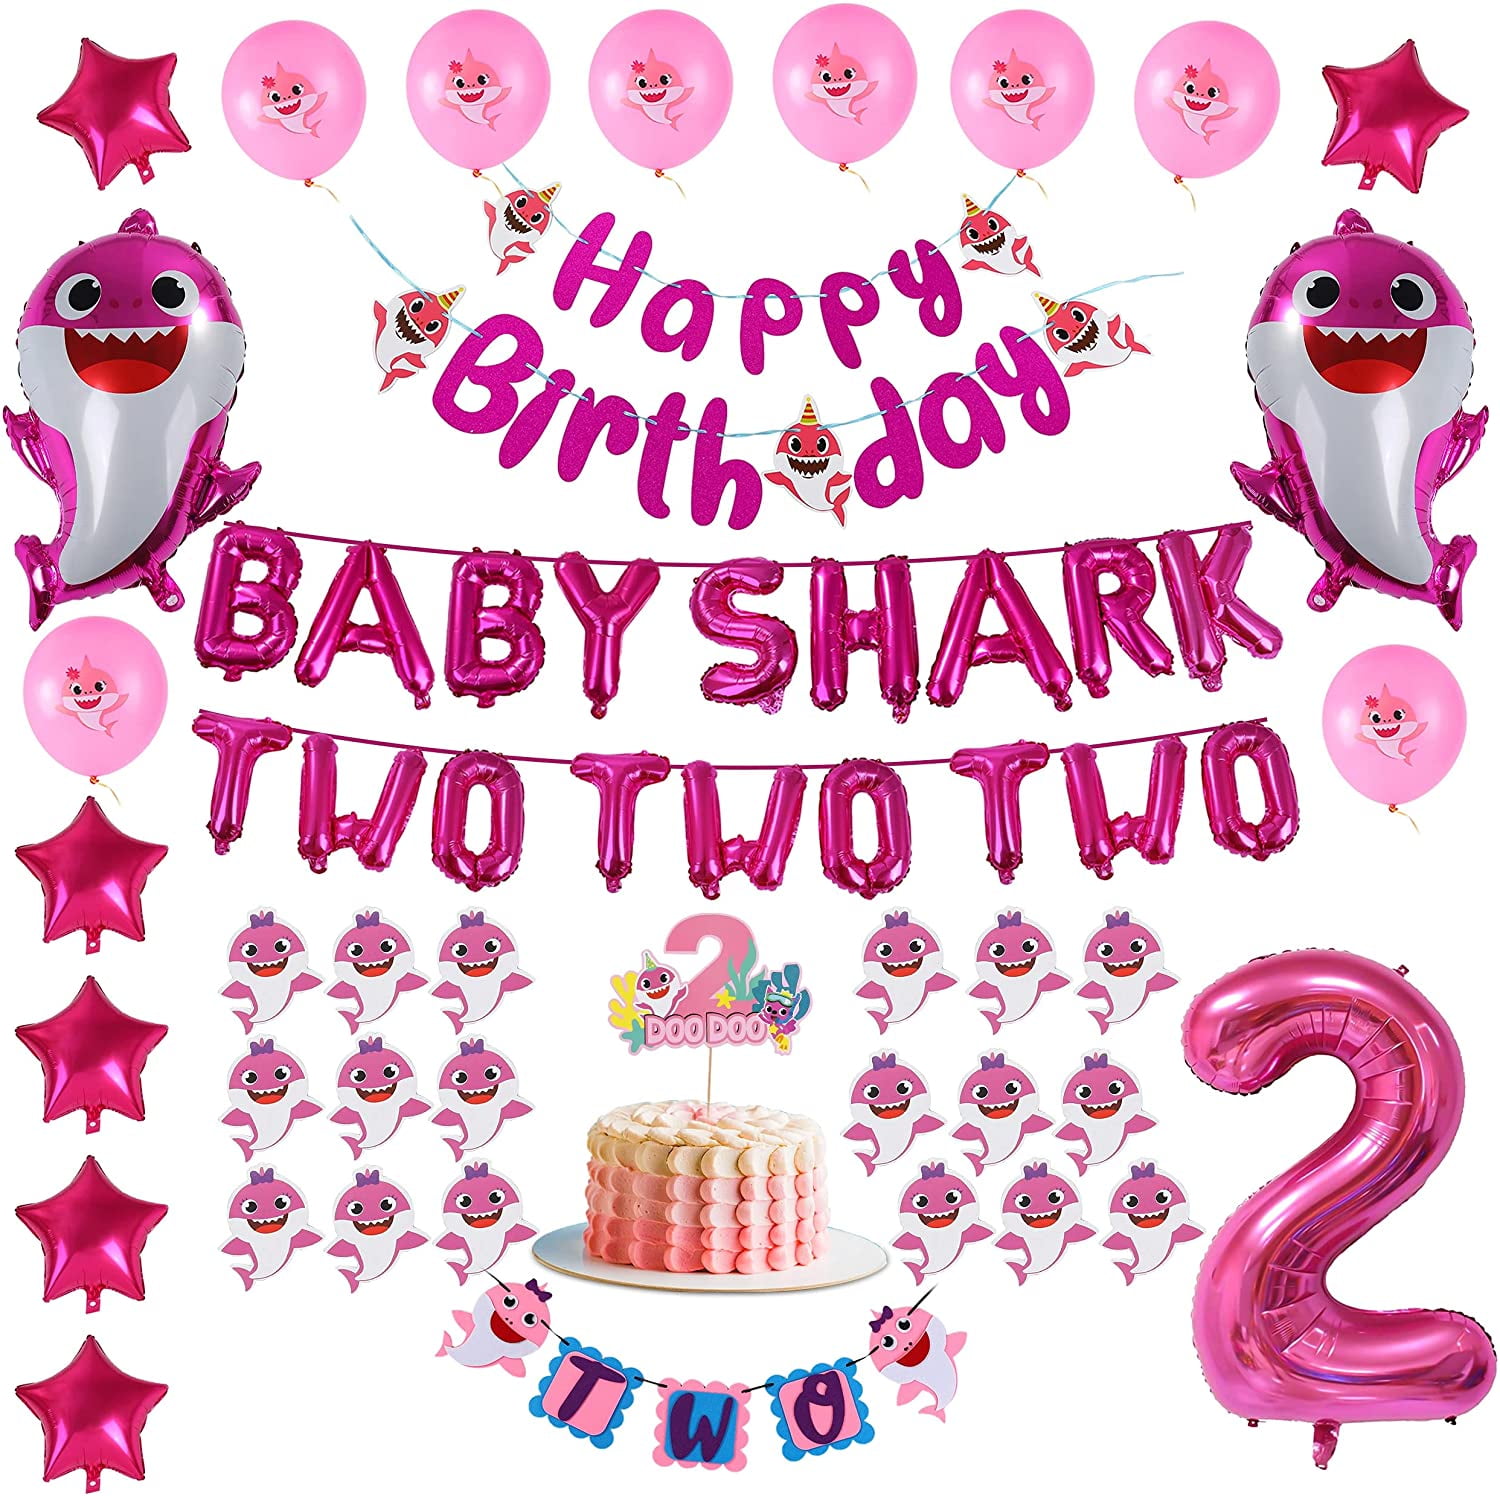 Personalised Baby Shark inspired Birthday Wrapping Paper